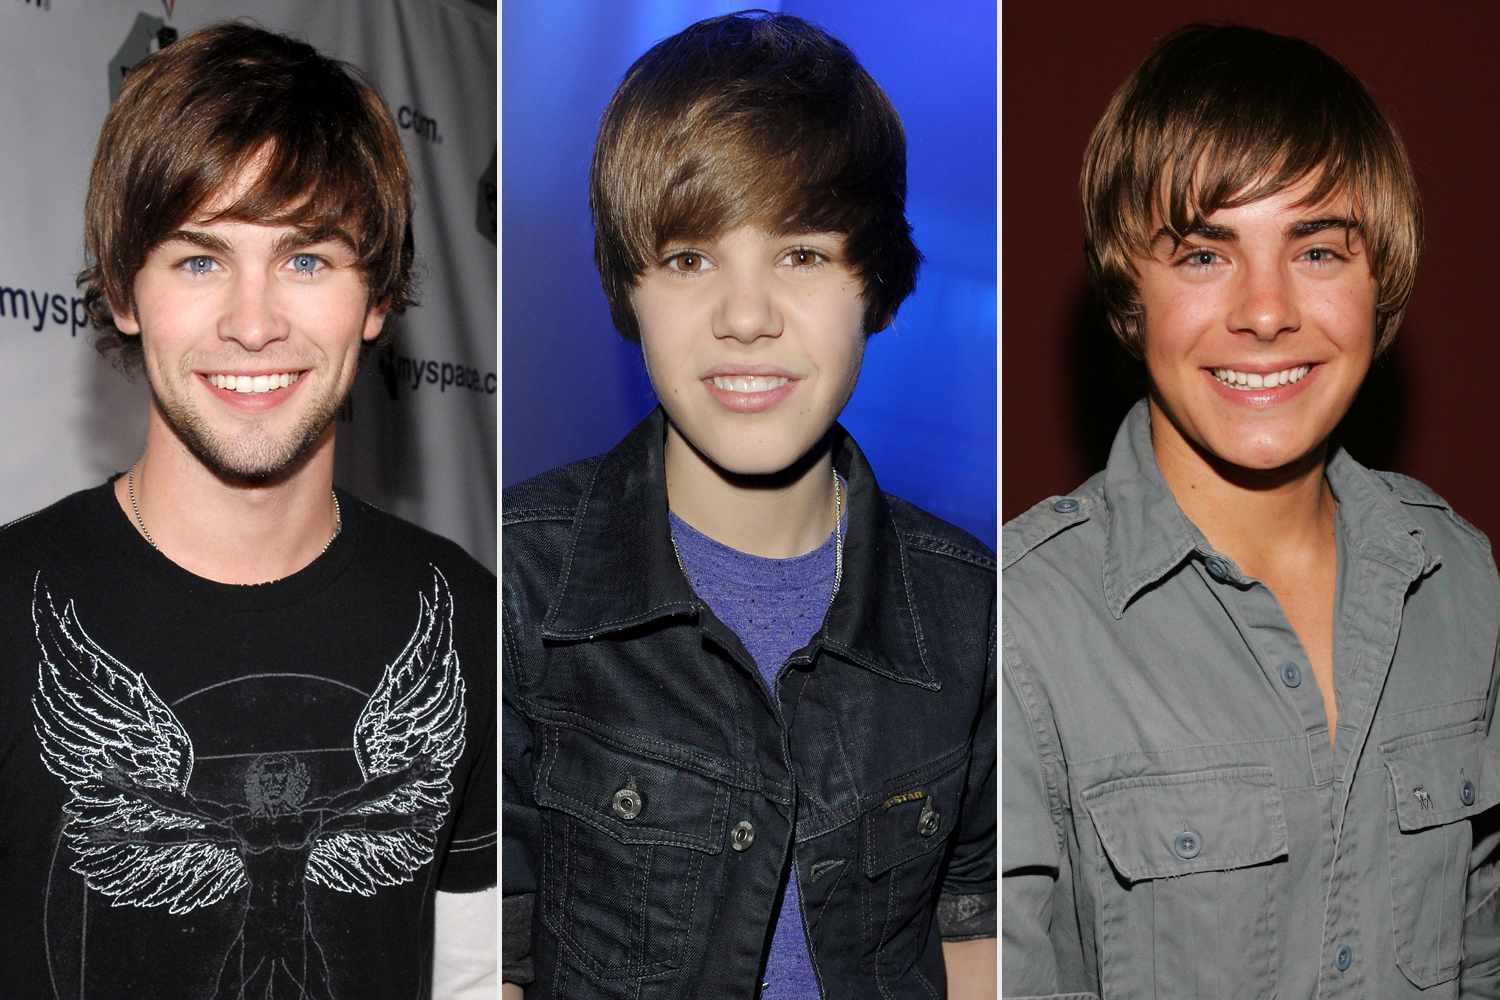 Chace Crawford thinks he rocked the Bieber bowl cut before Justin Bieber or Zac Efron: 'OG mop!'